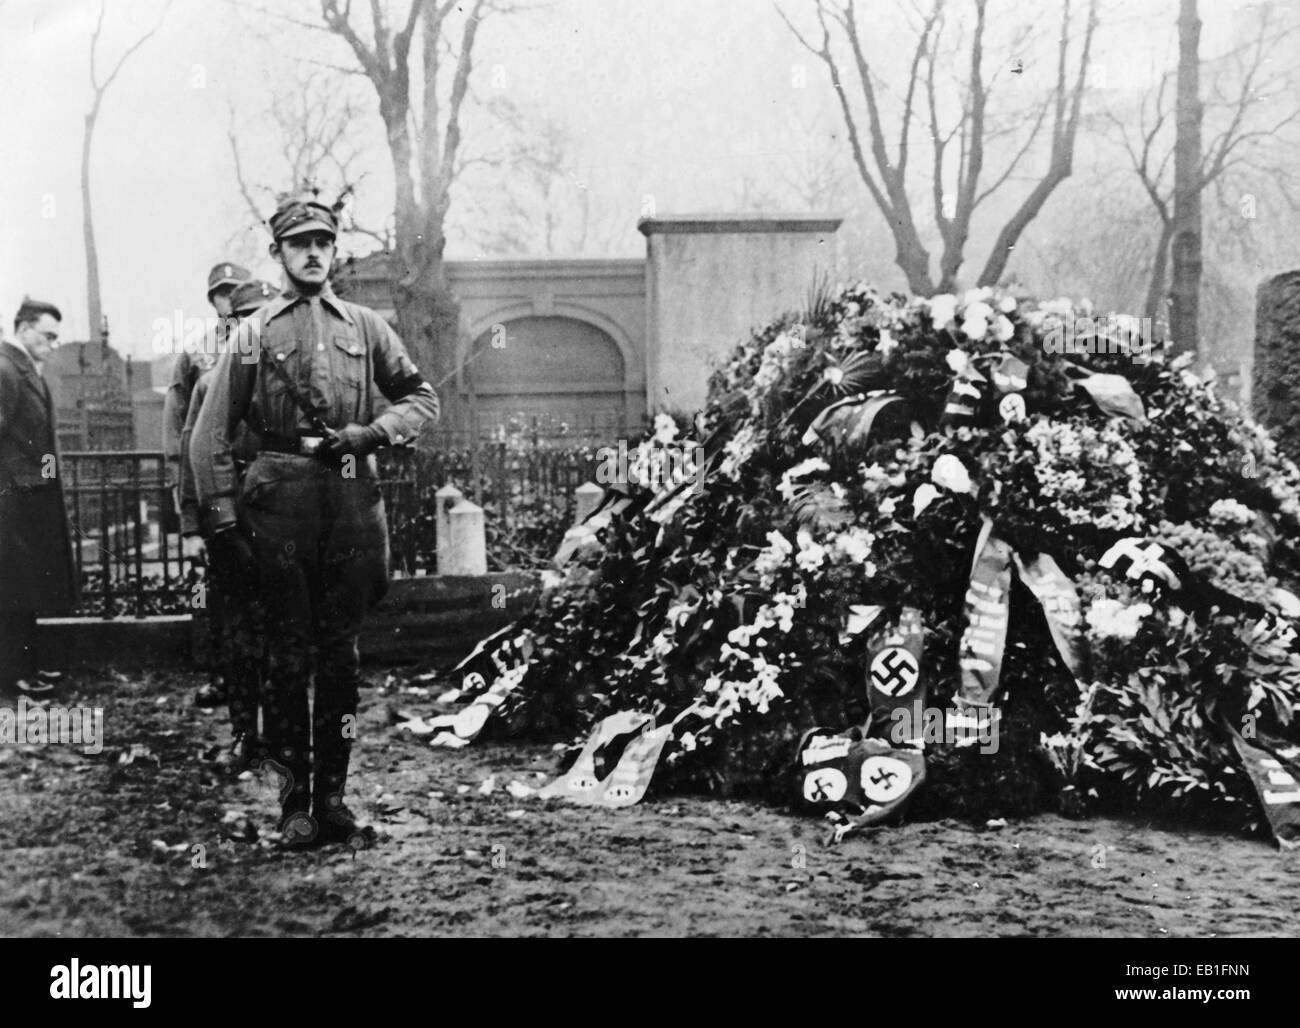 The Nazi propaganda photo shows members of the SA (Sturmabteilung) taking part in a guard of honor at the grave of a comrade who was killed during the so-called 'Kampf für die Bewegung' (Fight for the Movement), in 1930, location unknown. Fotoarchiv für Zeitgeschichtee - NO WIRE SERVICE Stock Photo